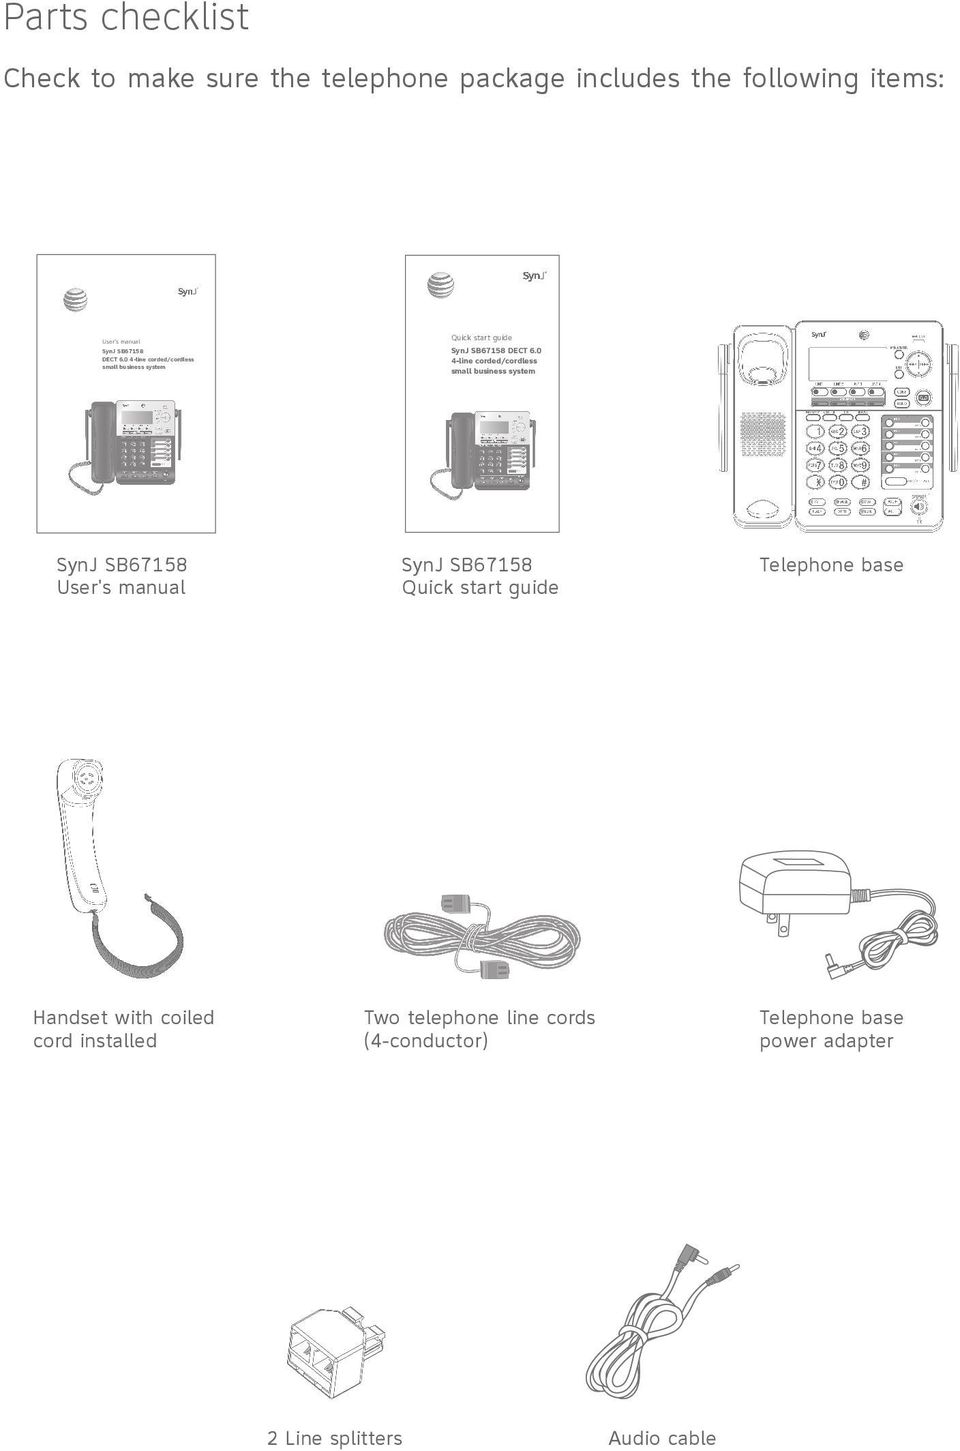 0 4-line corded/cordless small business system SynJ SB67158 User's manual SynJ SB67158 Quick start guide Telephone